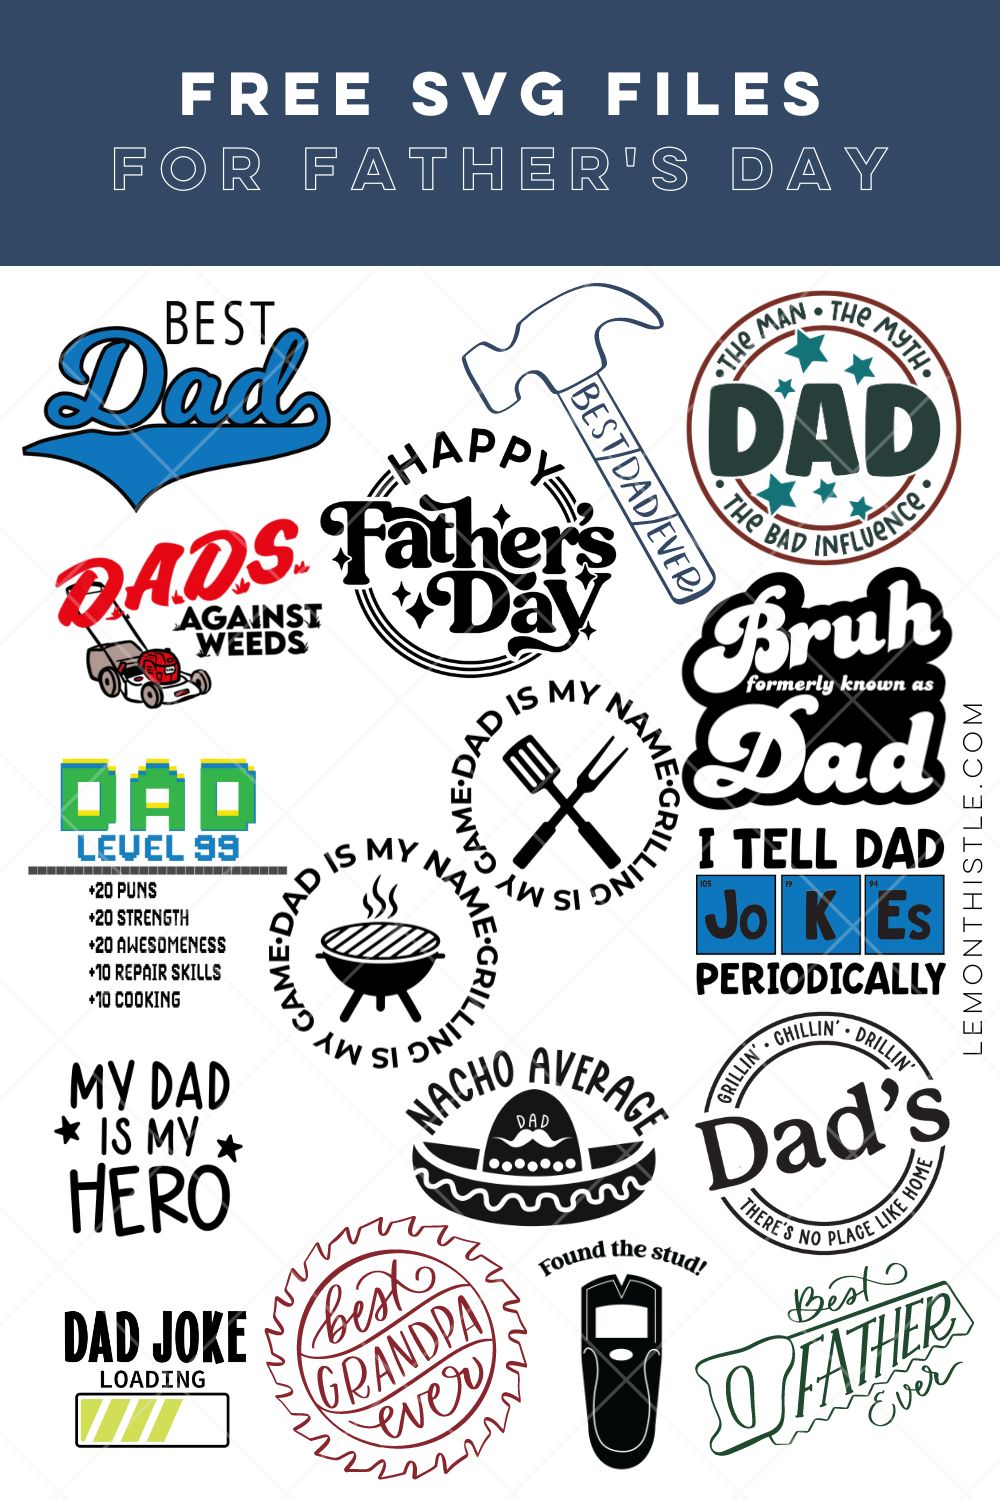 collage of 15 free SVG files for fathers day